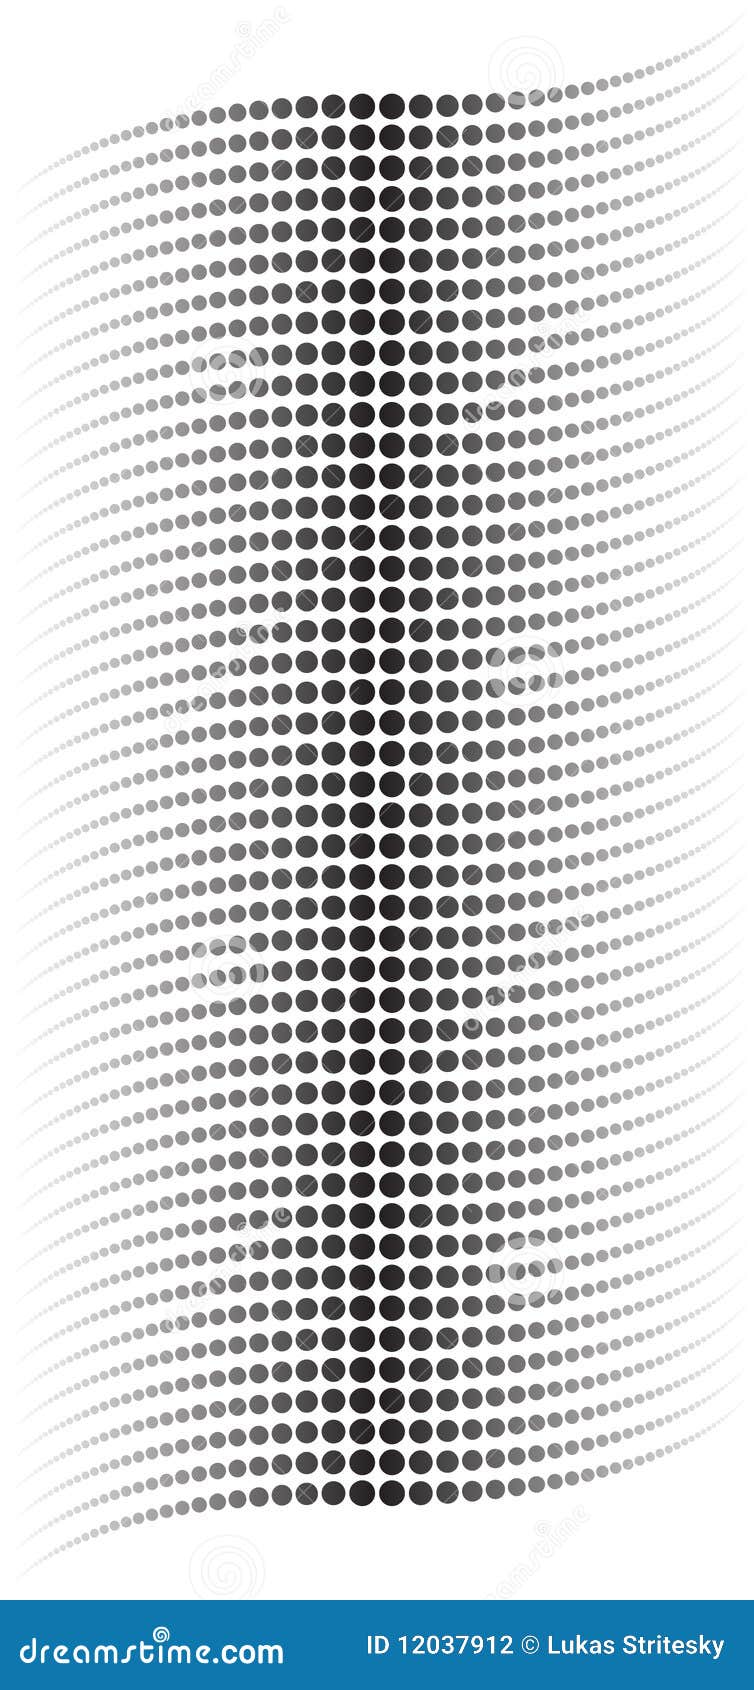 Black dots making a vertical banner of a halftone wave.